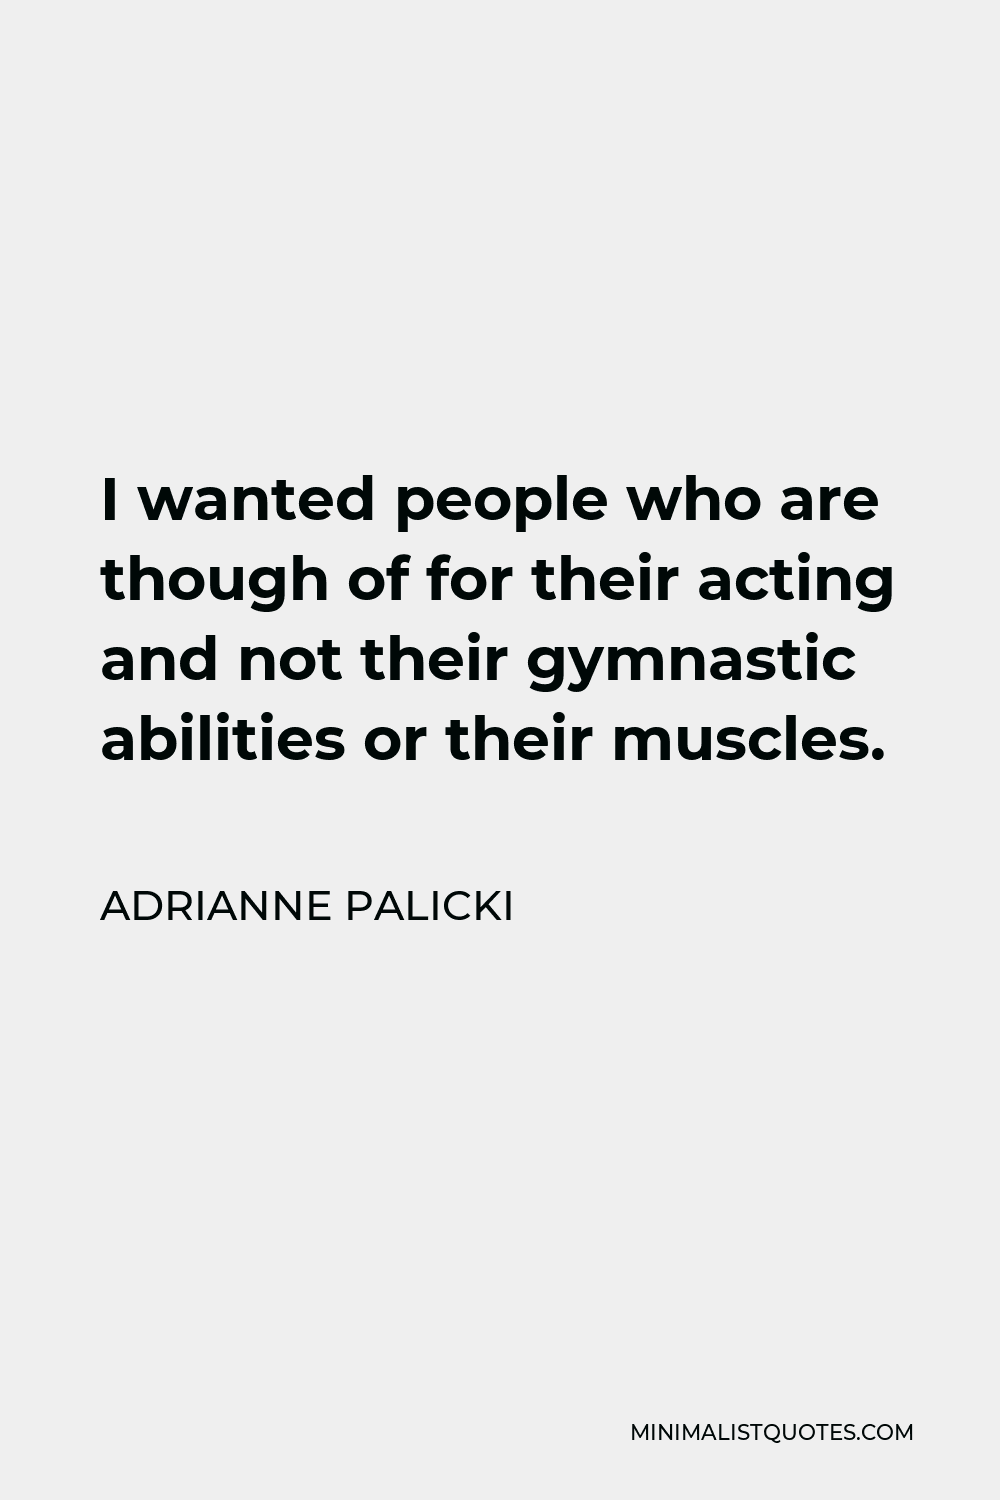 Adrianne Palicki Quote - I wanted people who are though of for their acting and not their gymnastic abilities or their muscles.